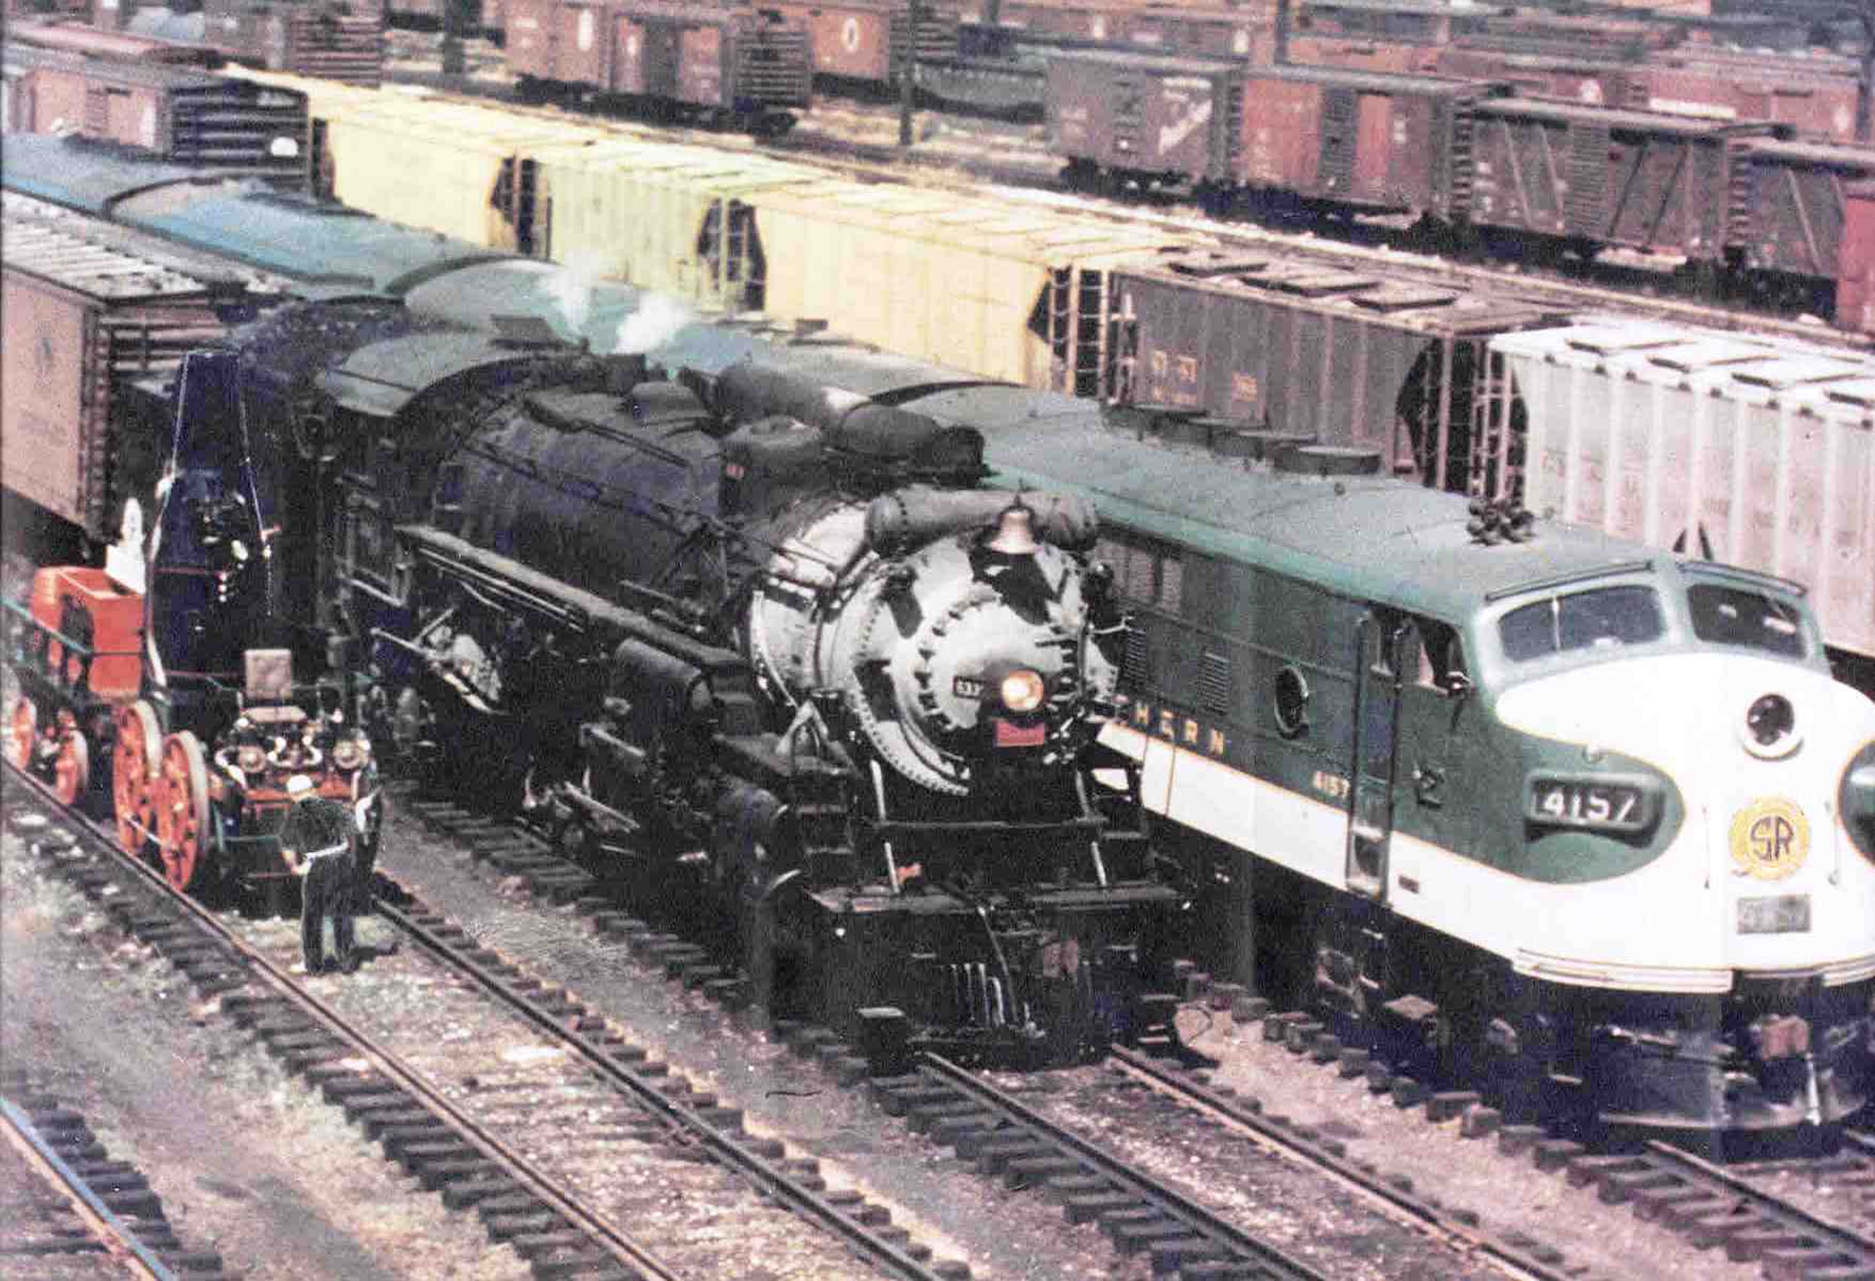 In the center is steam engine #6330, flanked by the Best Friend of Charleston and Southern F-3 (later designated as an F-7) #4157.)